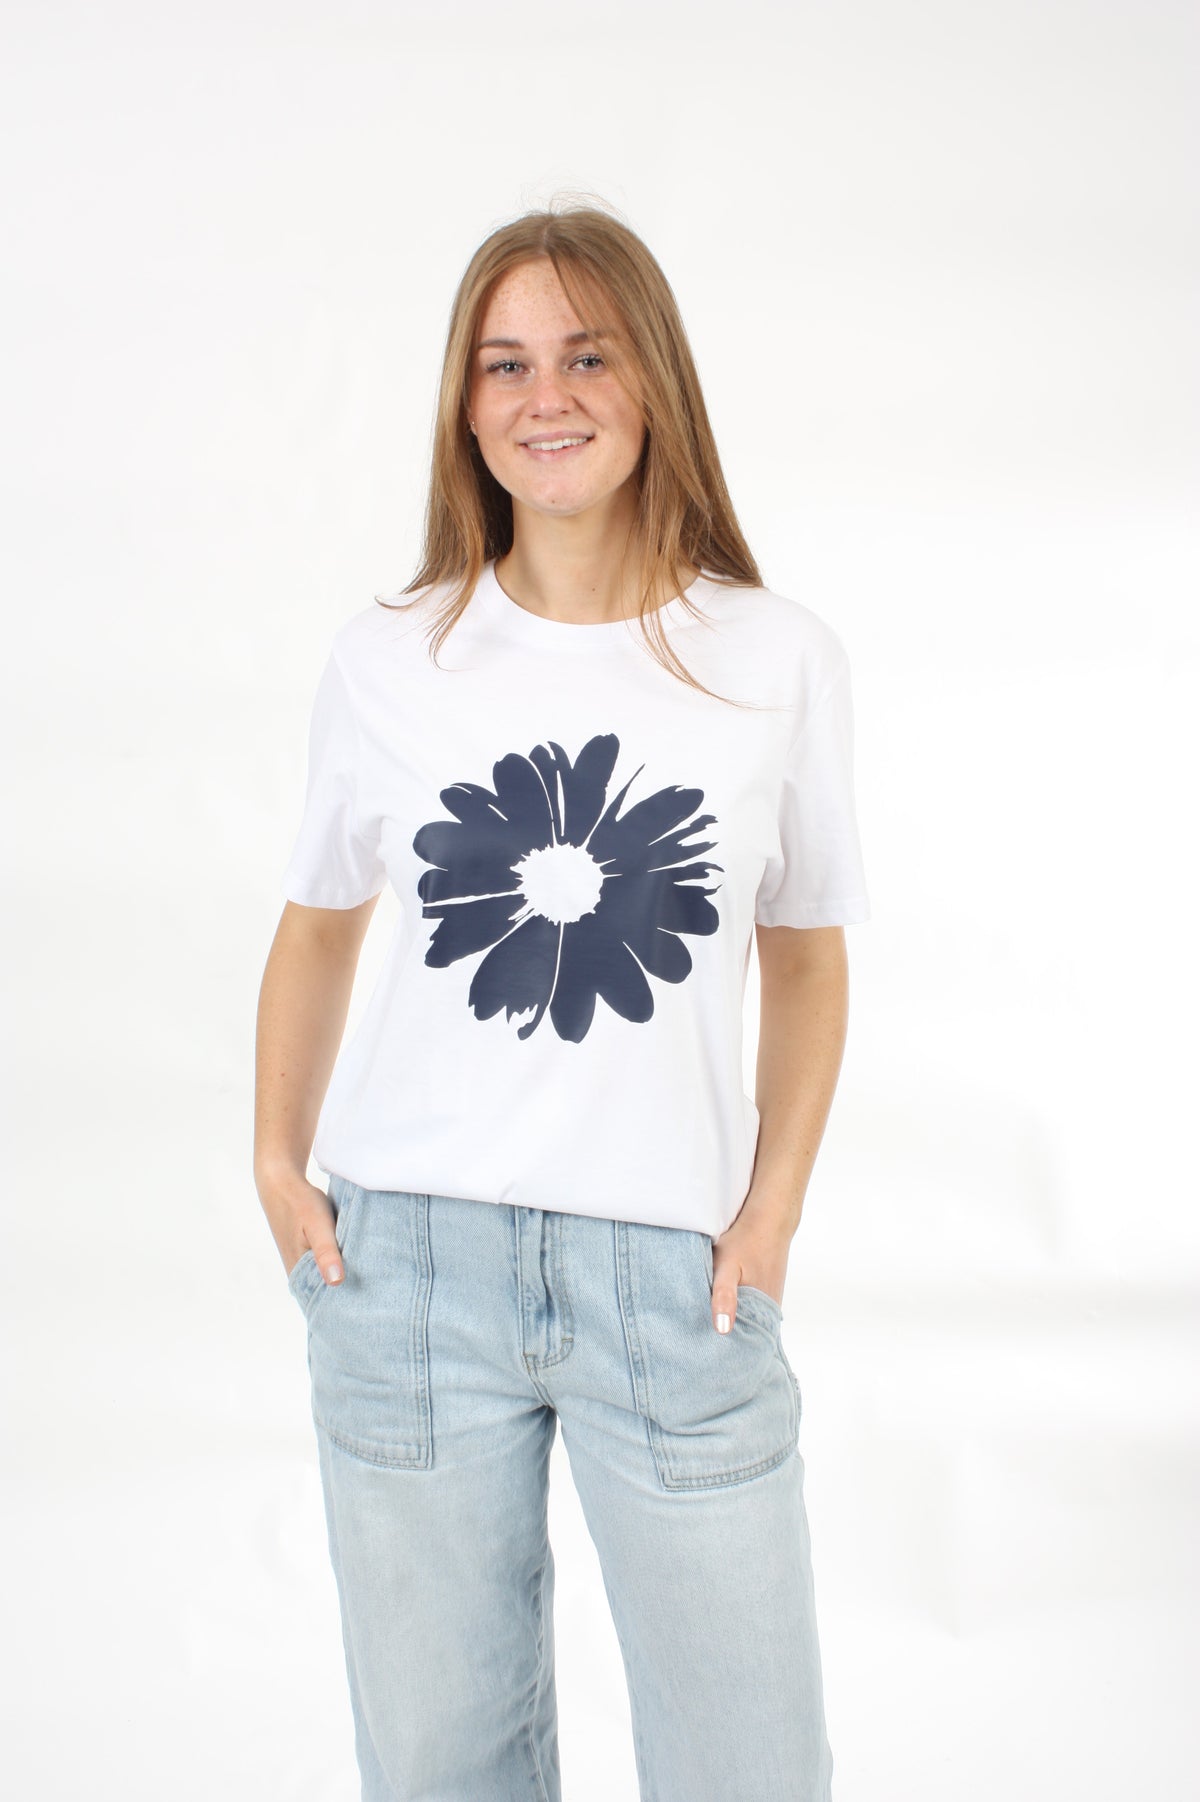 Tee Shirt - white with Navy Daisy Print - Pre Order